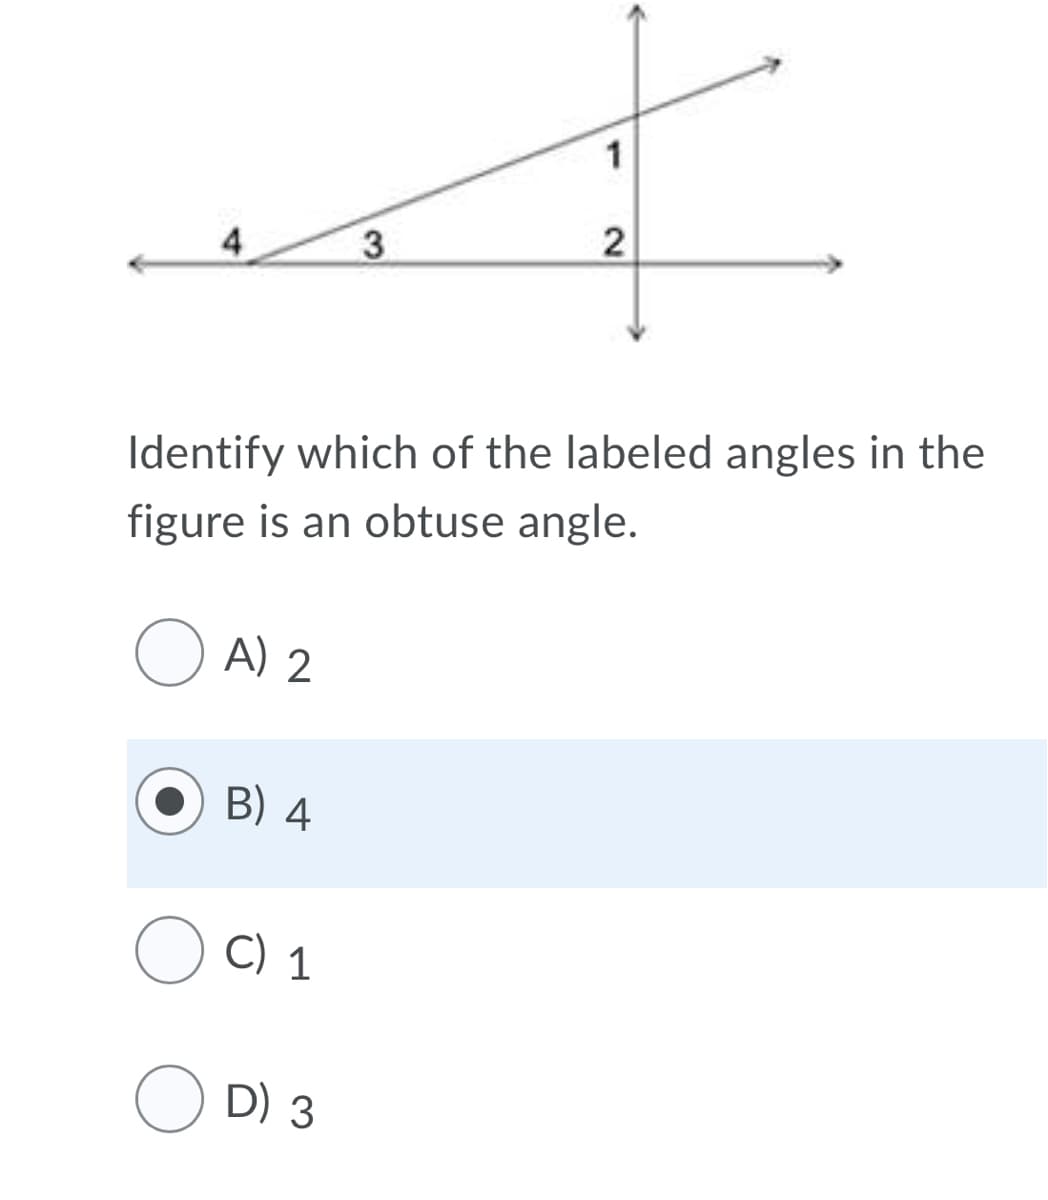 1
4
3
2
Identify which of the labeled angles in the
figure is an obtuse angle.
O A) 2
B) 4
O C) 1
O D) 3
